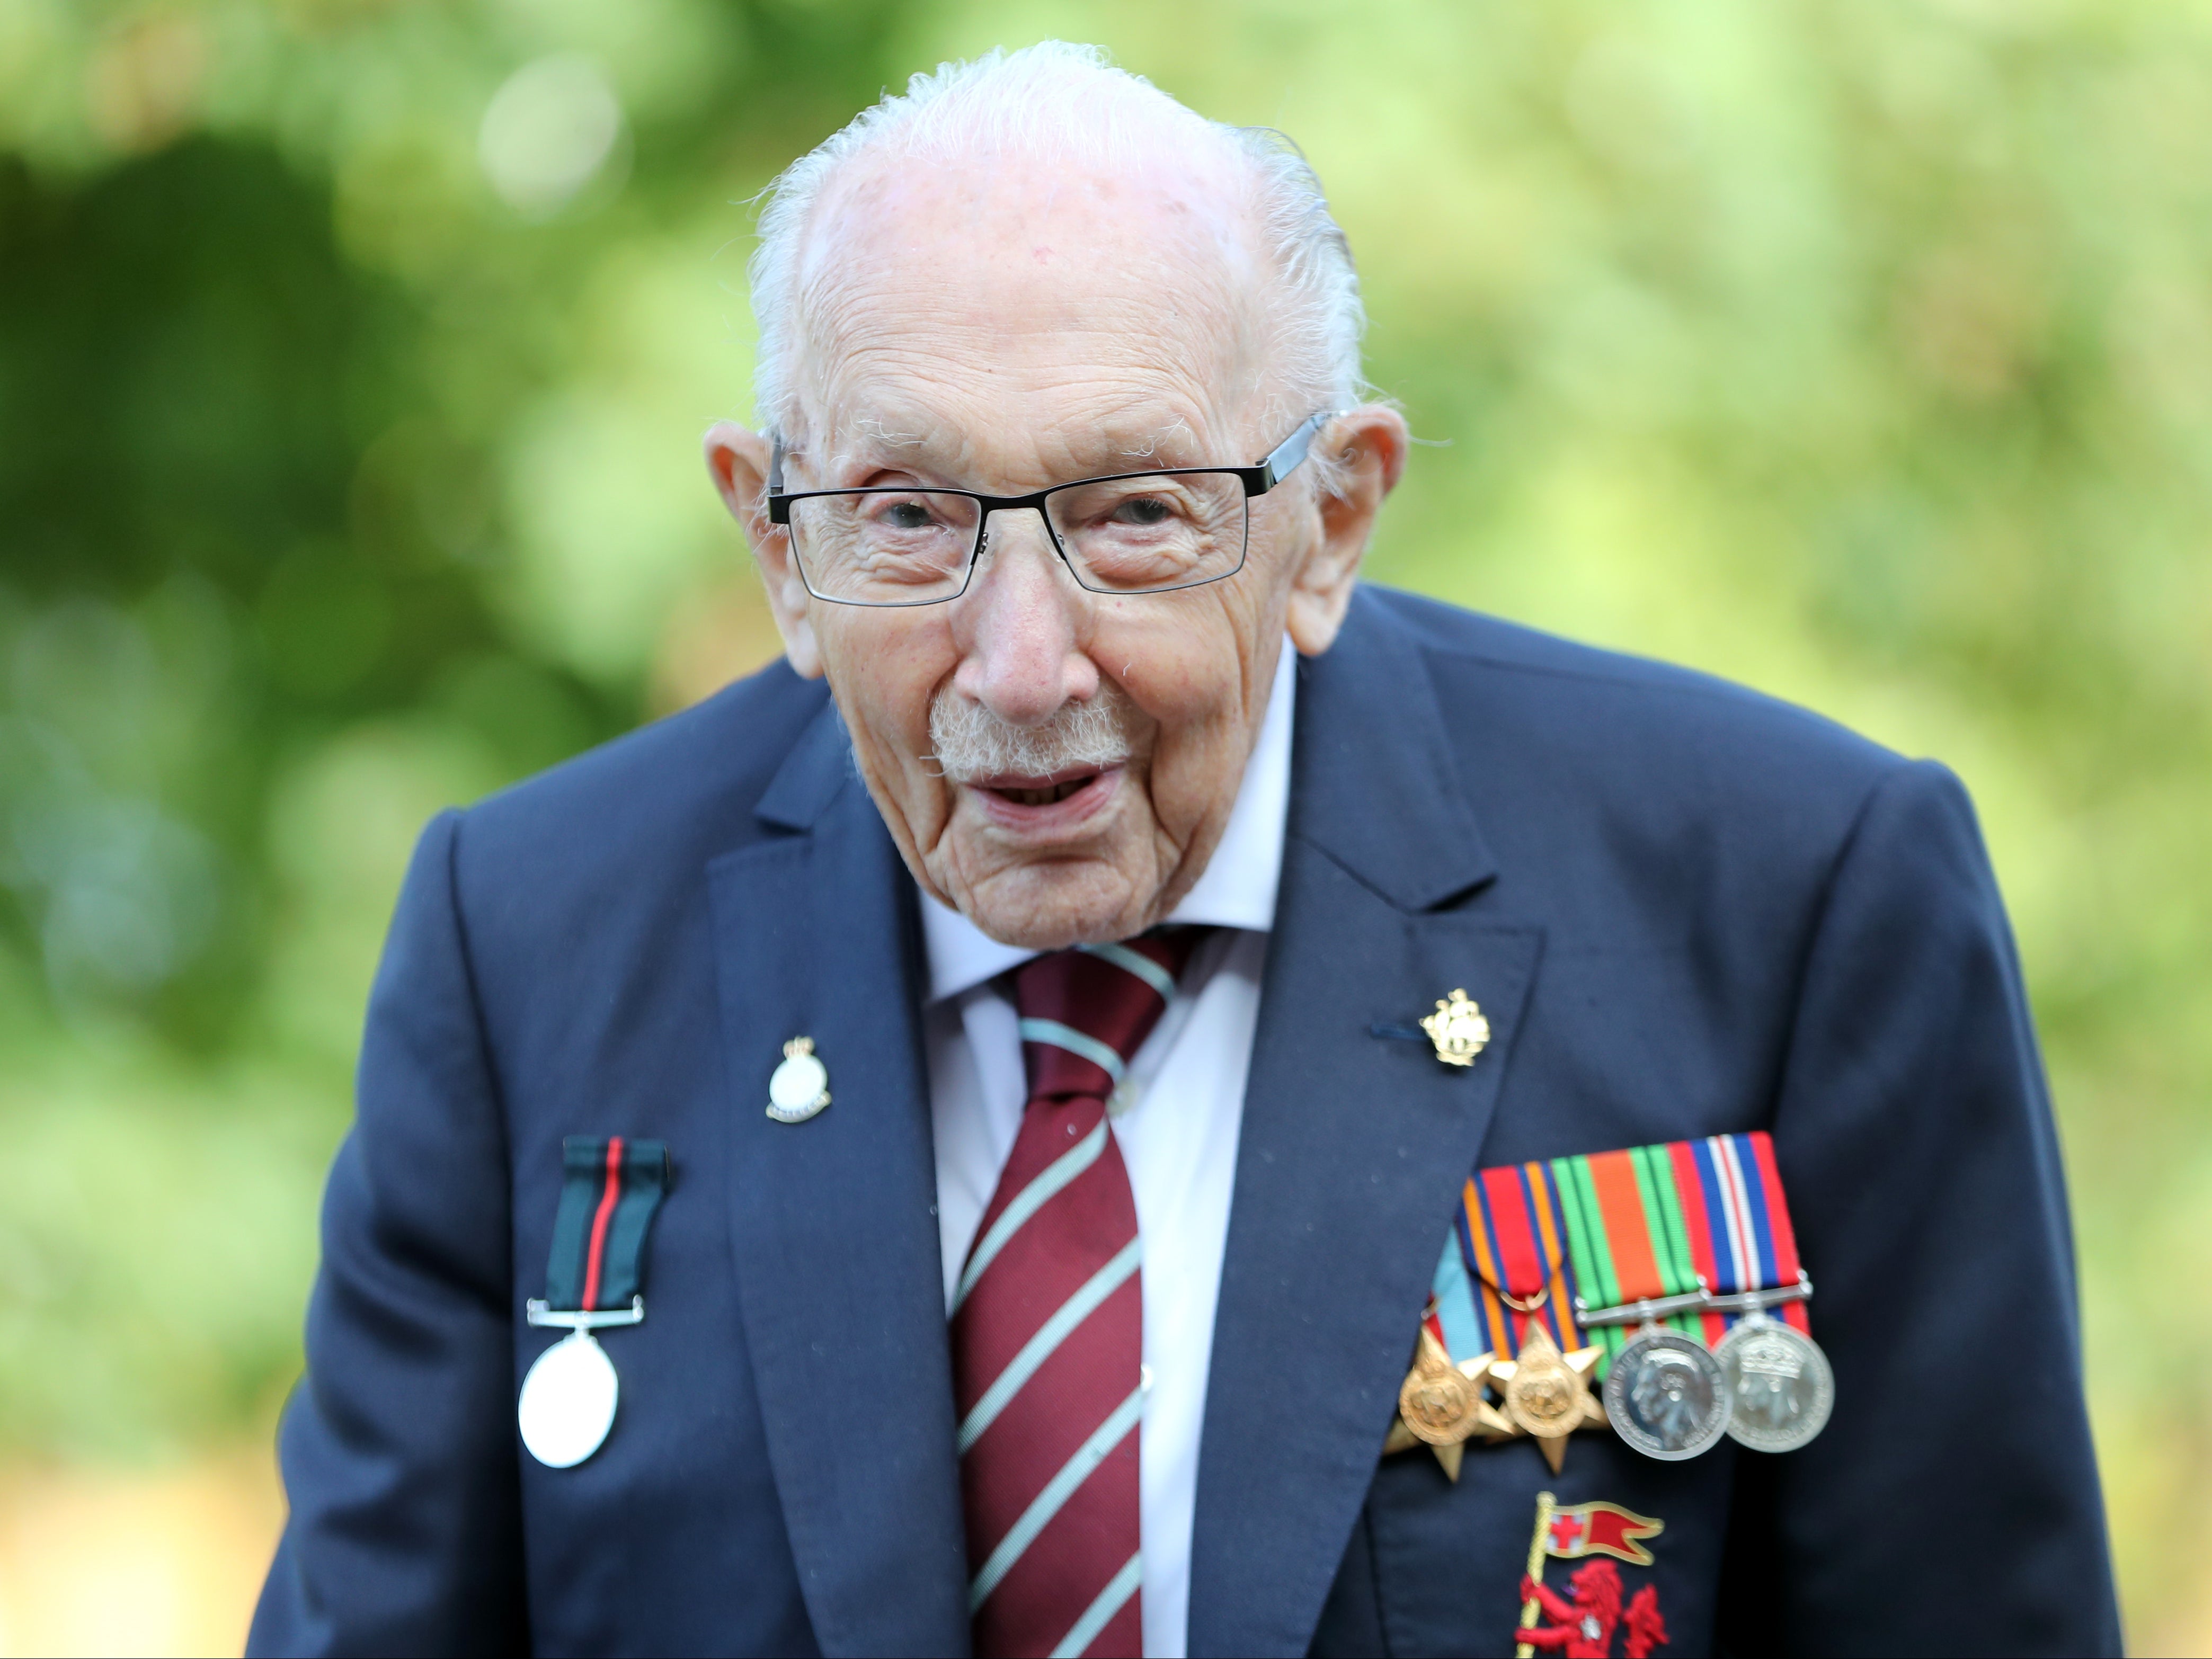 The 100-year-old national hero died in hospital last week after testing positive for Covid-19